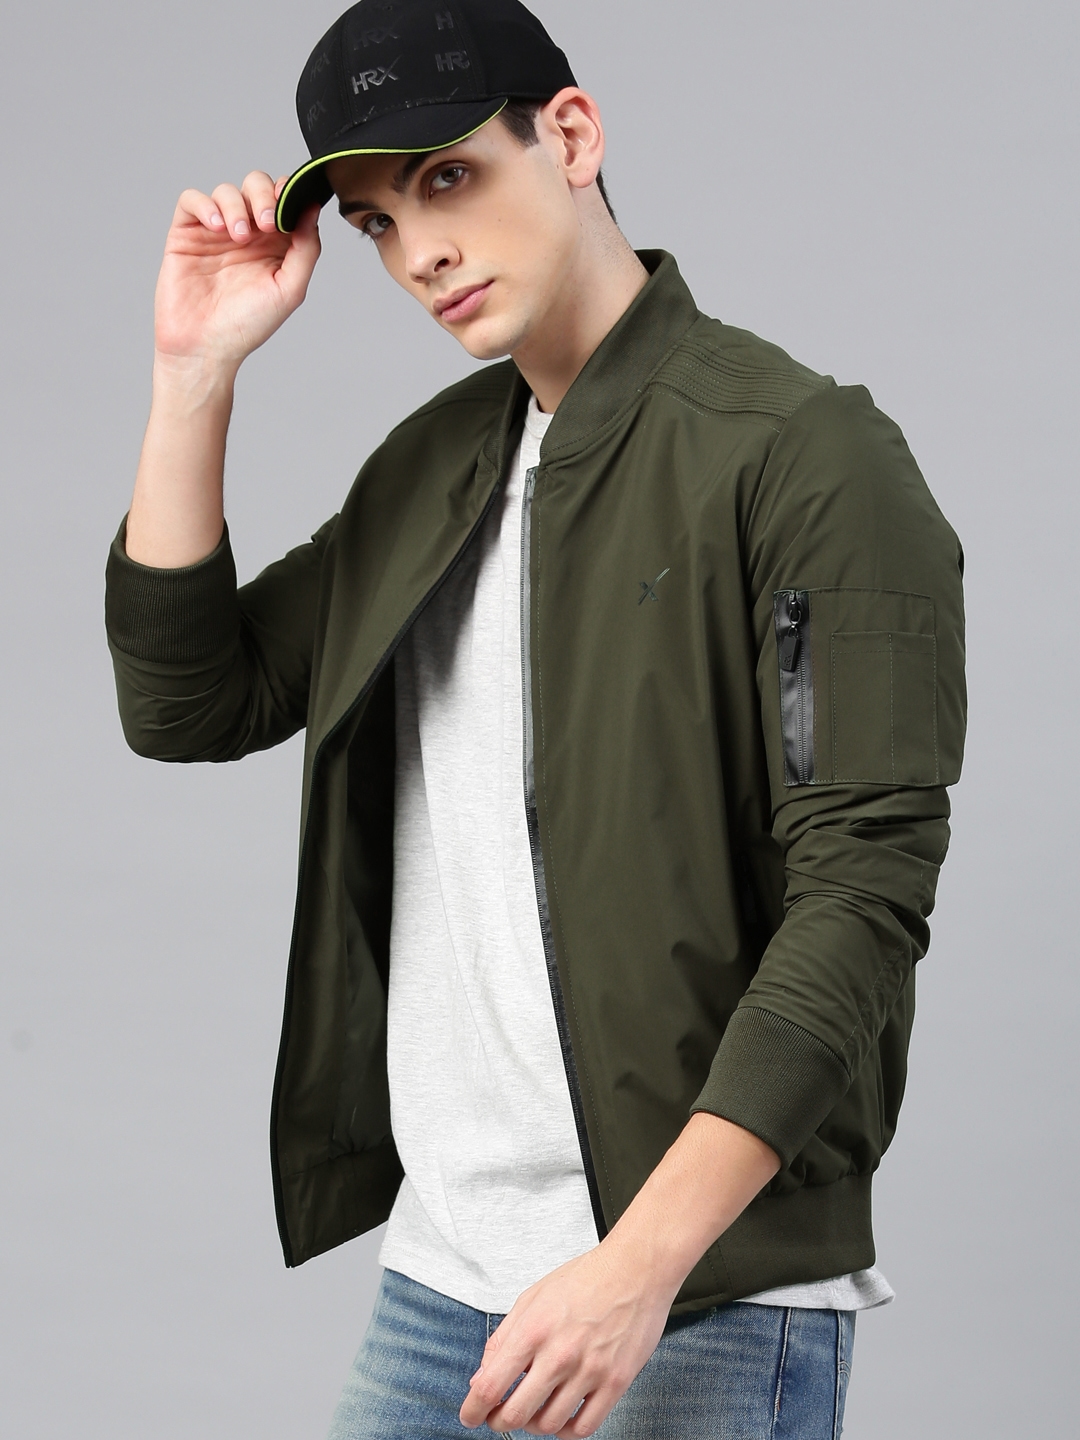 Shop for the perfect full sleeves jacket for men from Woodland.-seedfund.vn